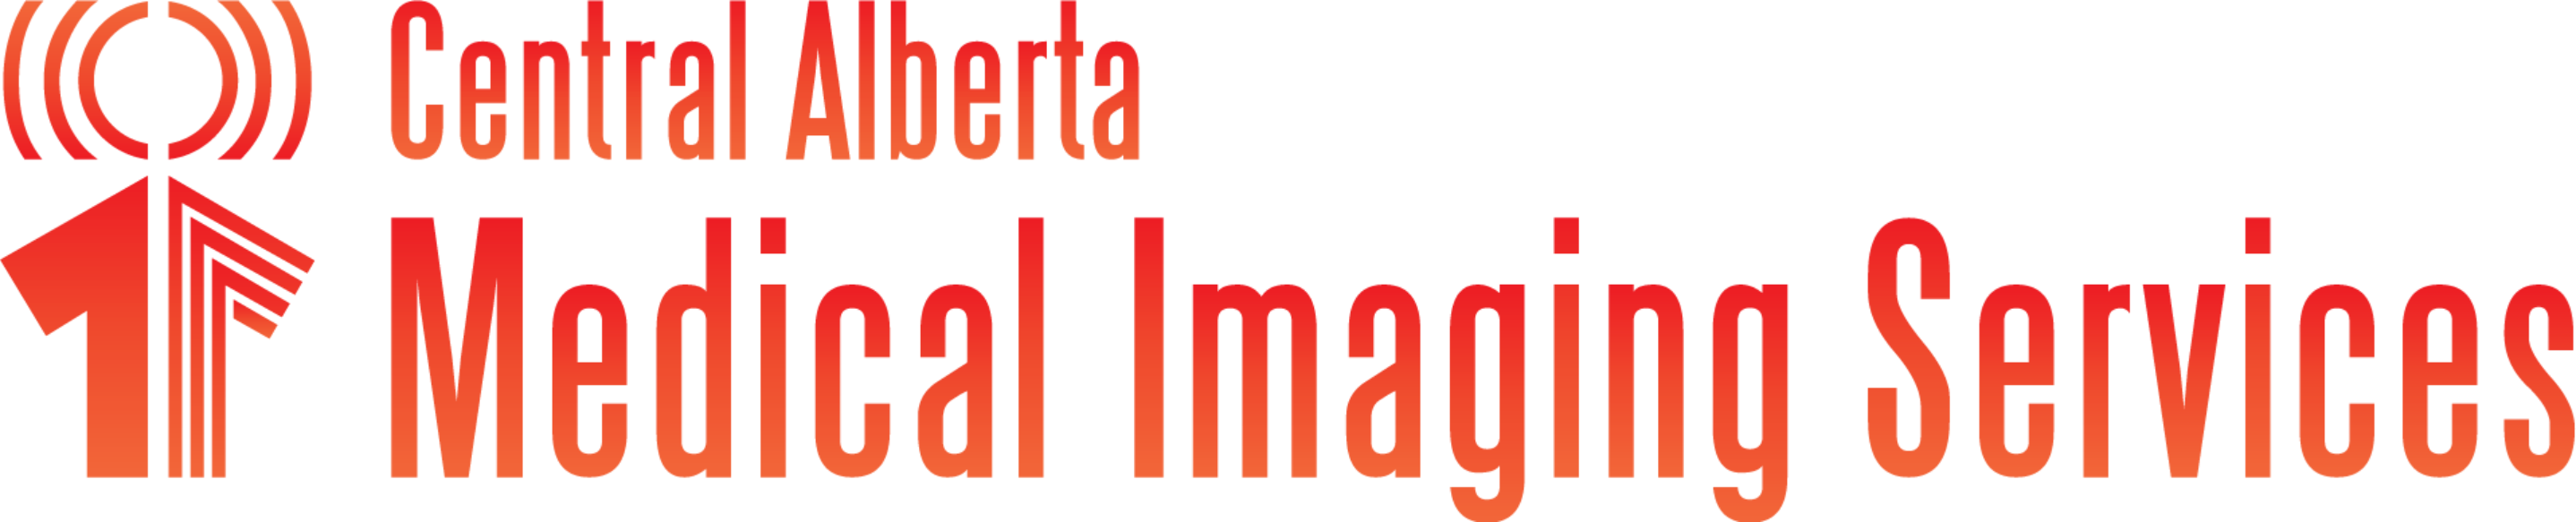 Central Alberta Medical Imaging Services